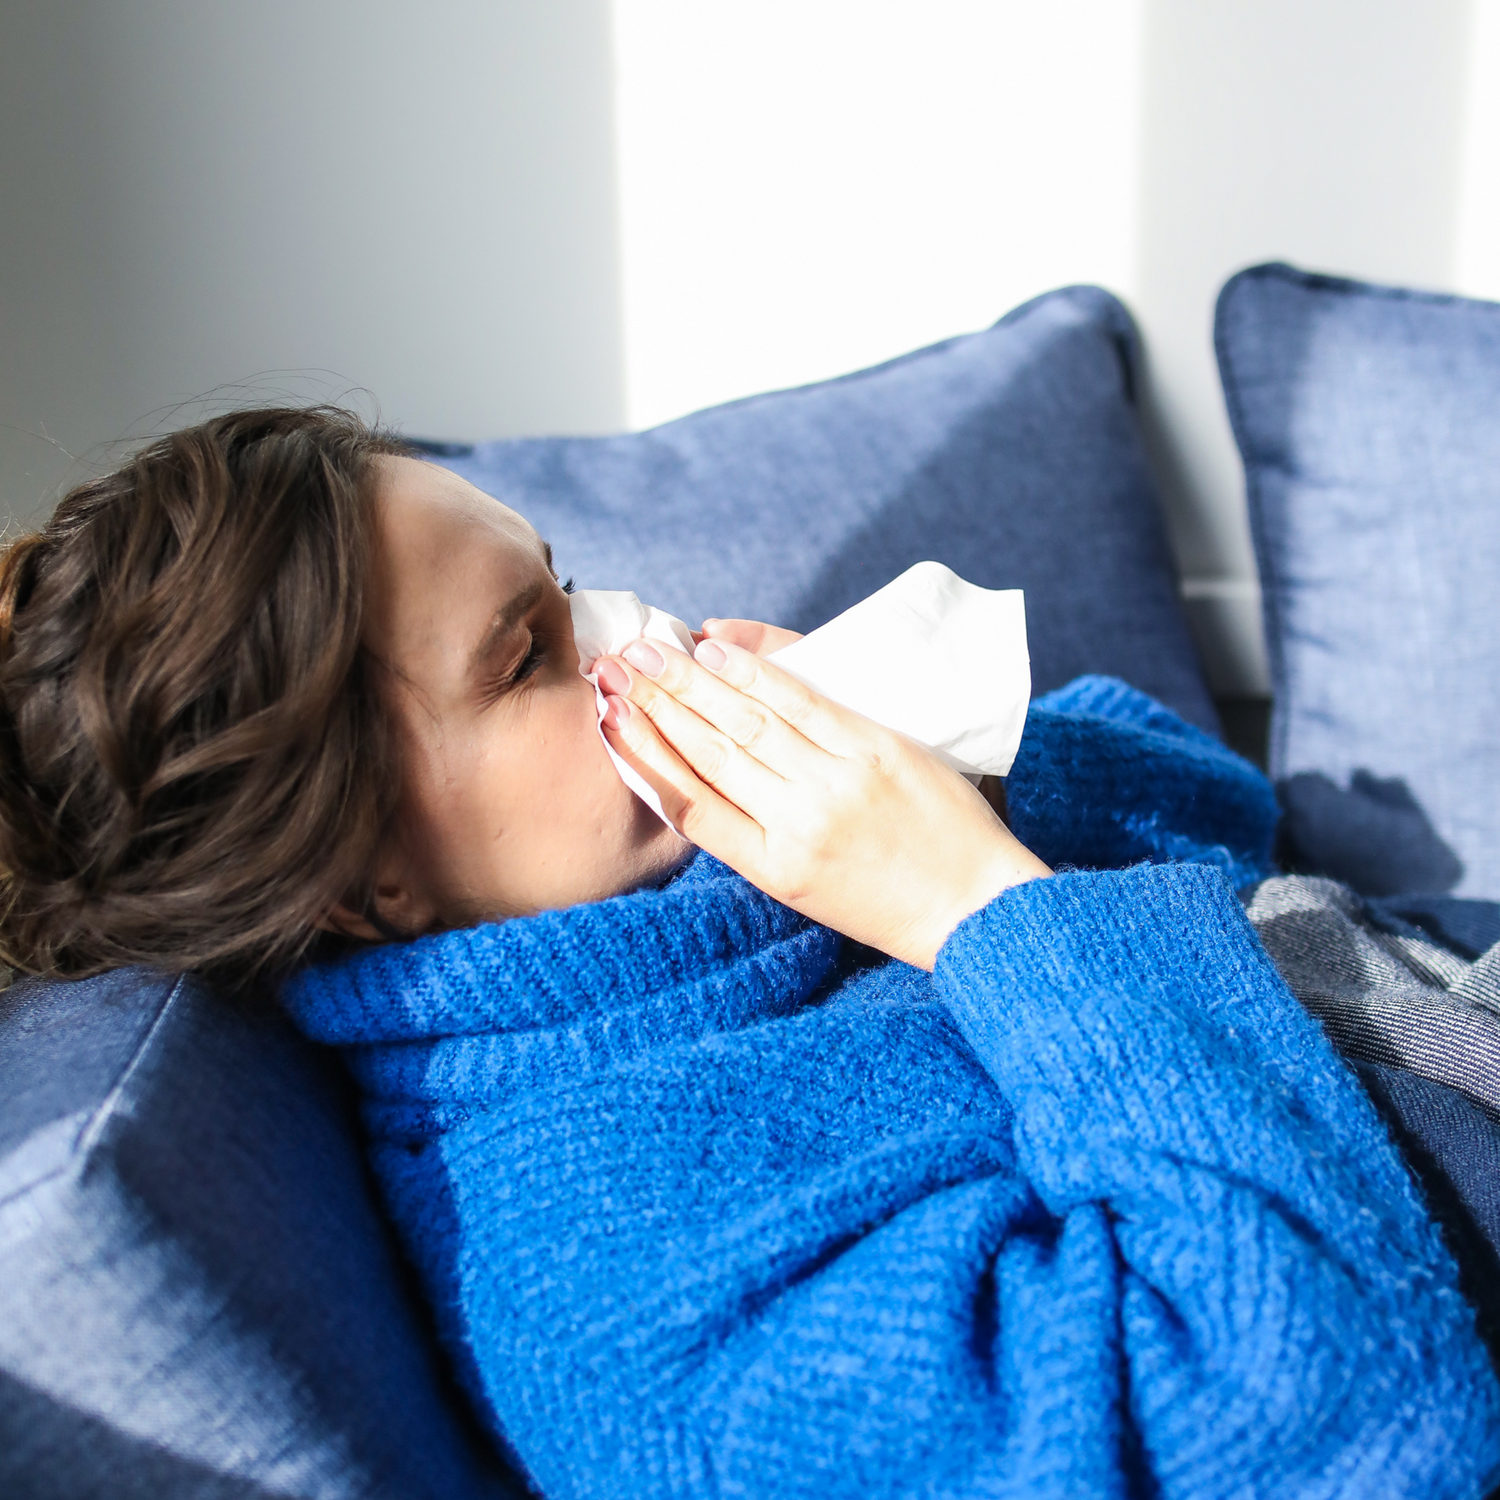 Should you work out if you are sick with a cold